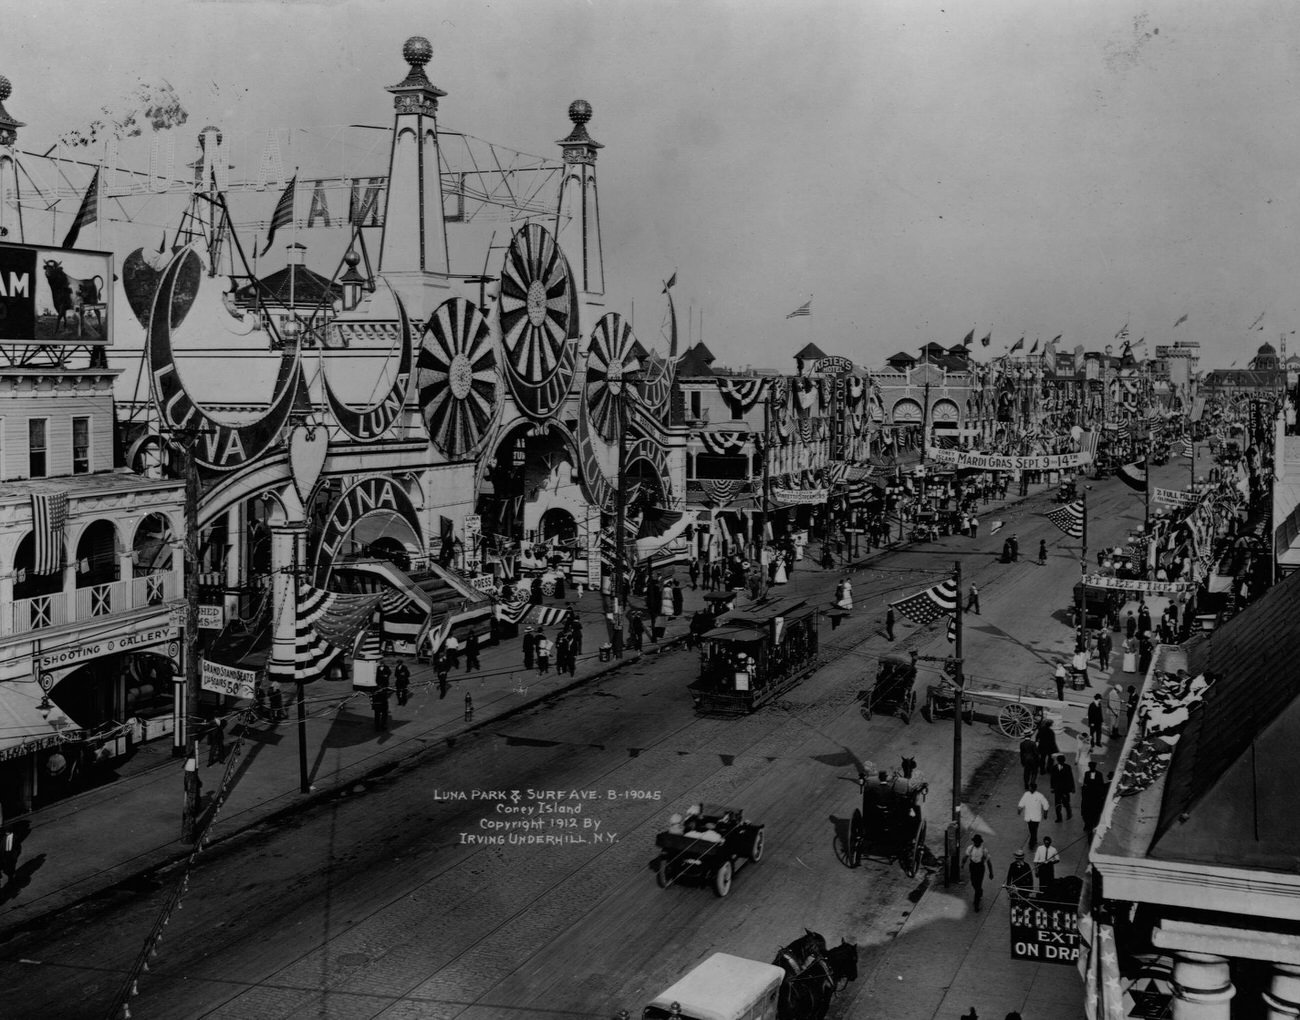 Luna Park And Surf Avenue In Coney Island.